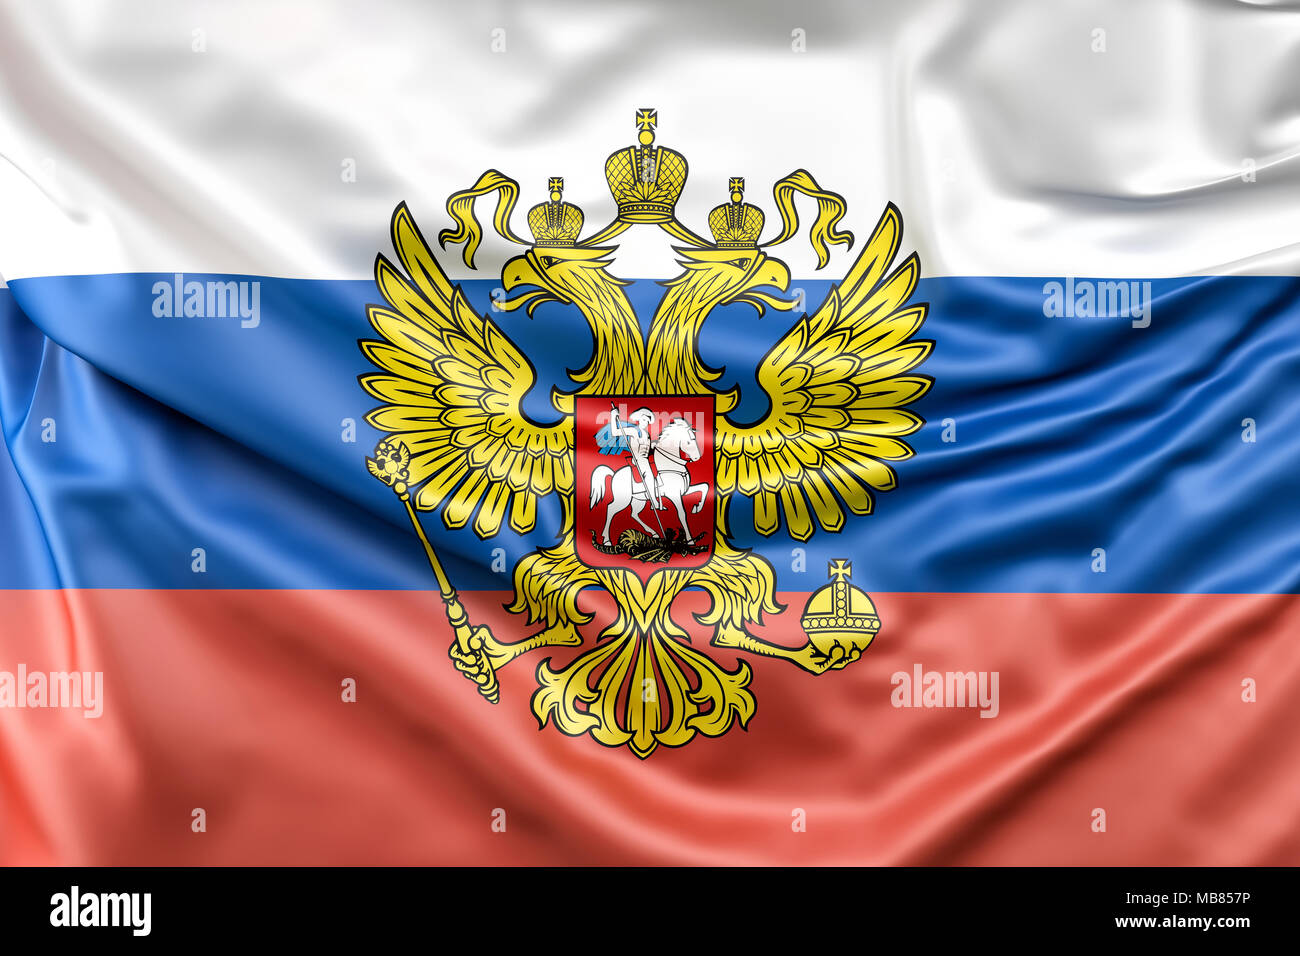 Flag of Russia with coat of arms Stock Photo